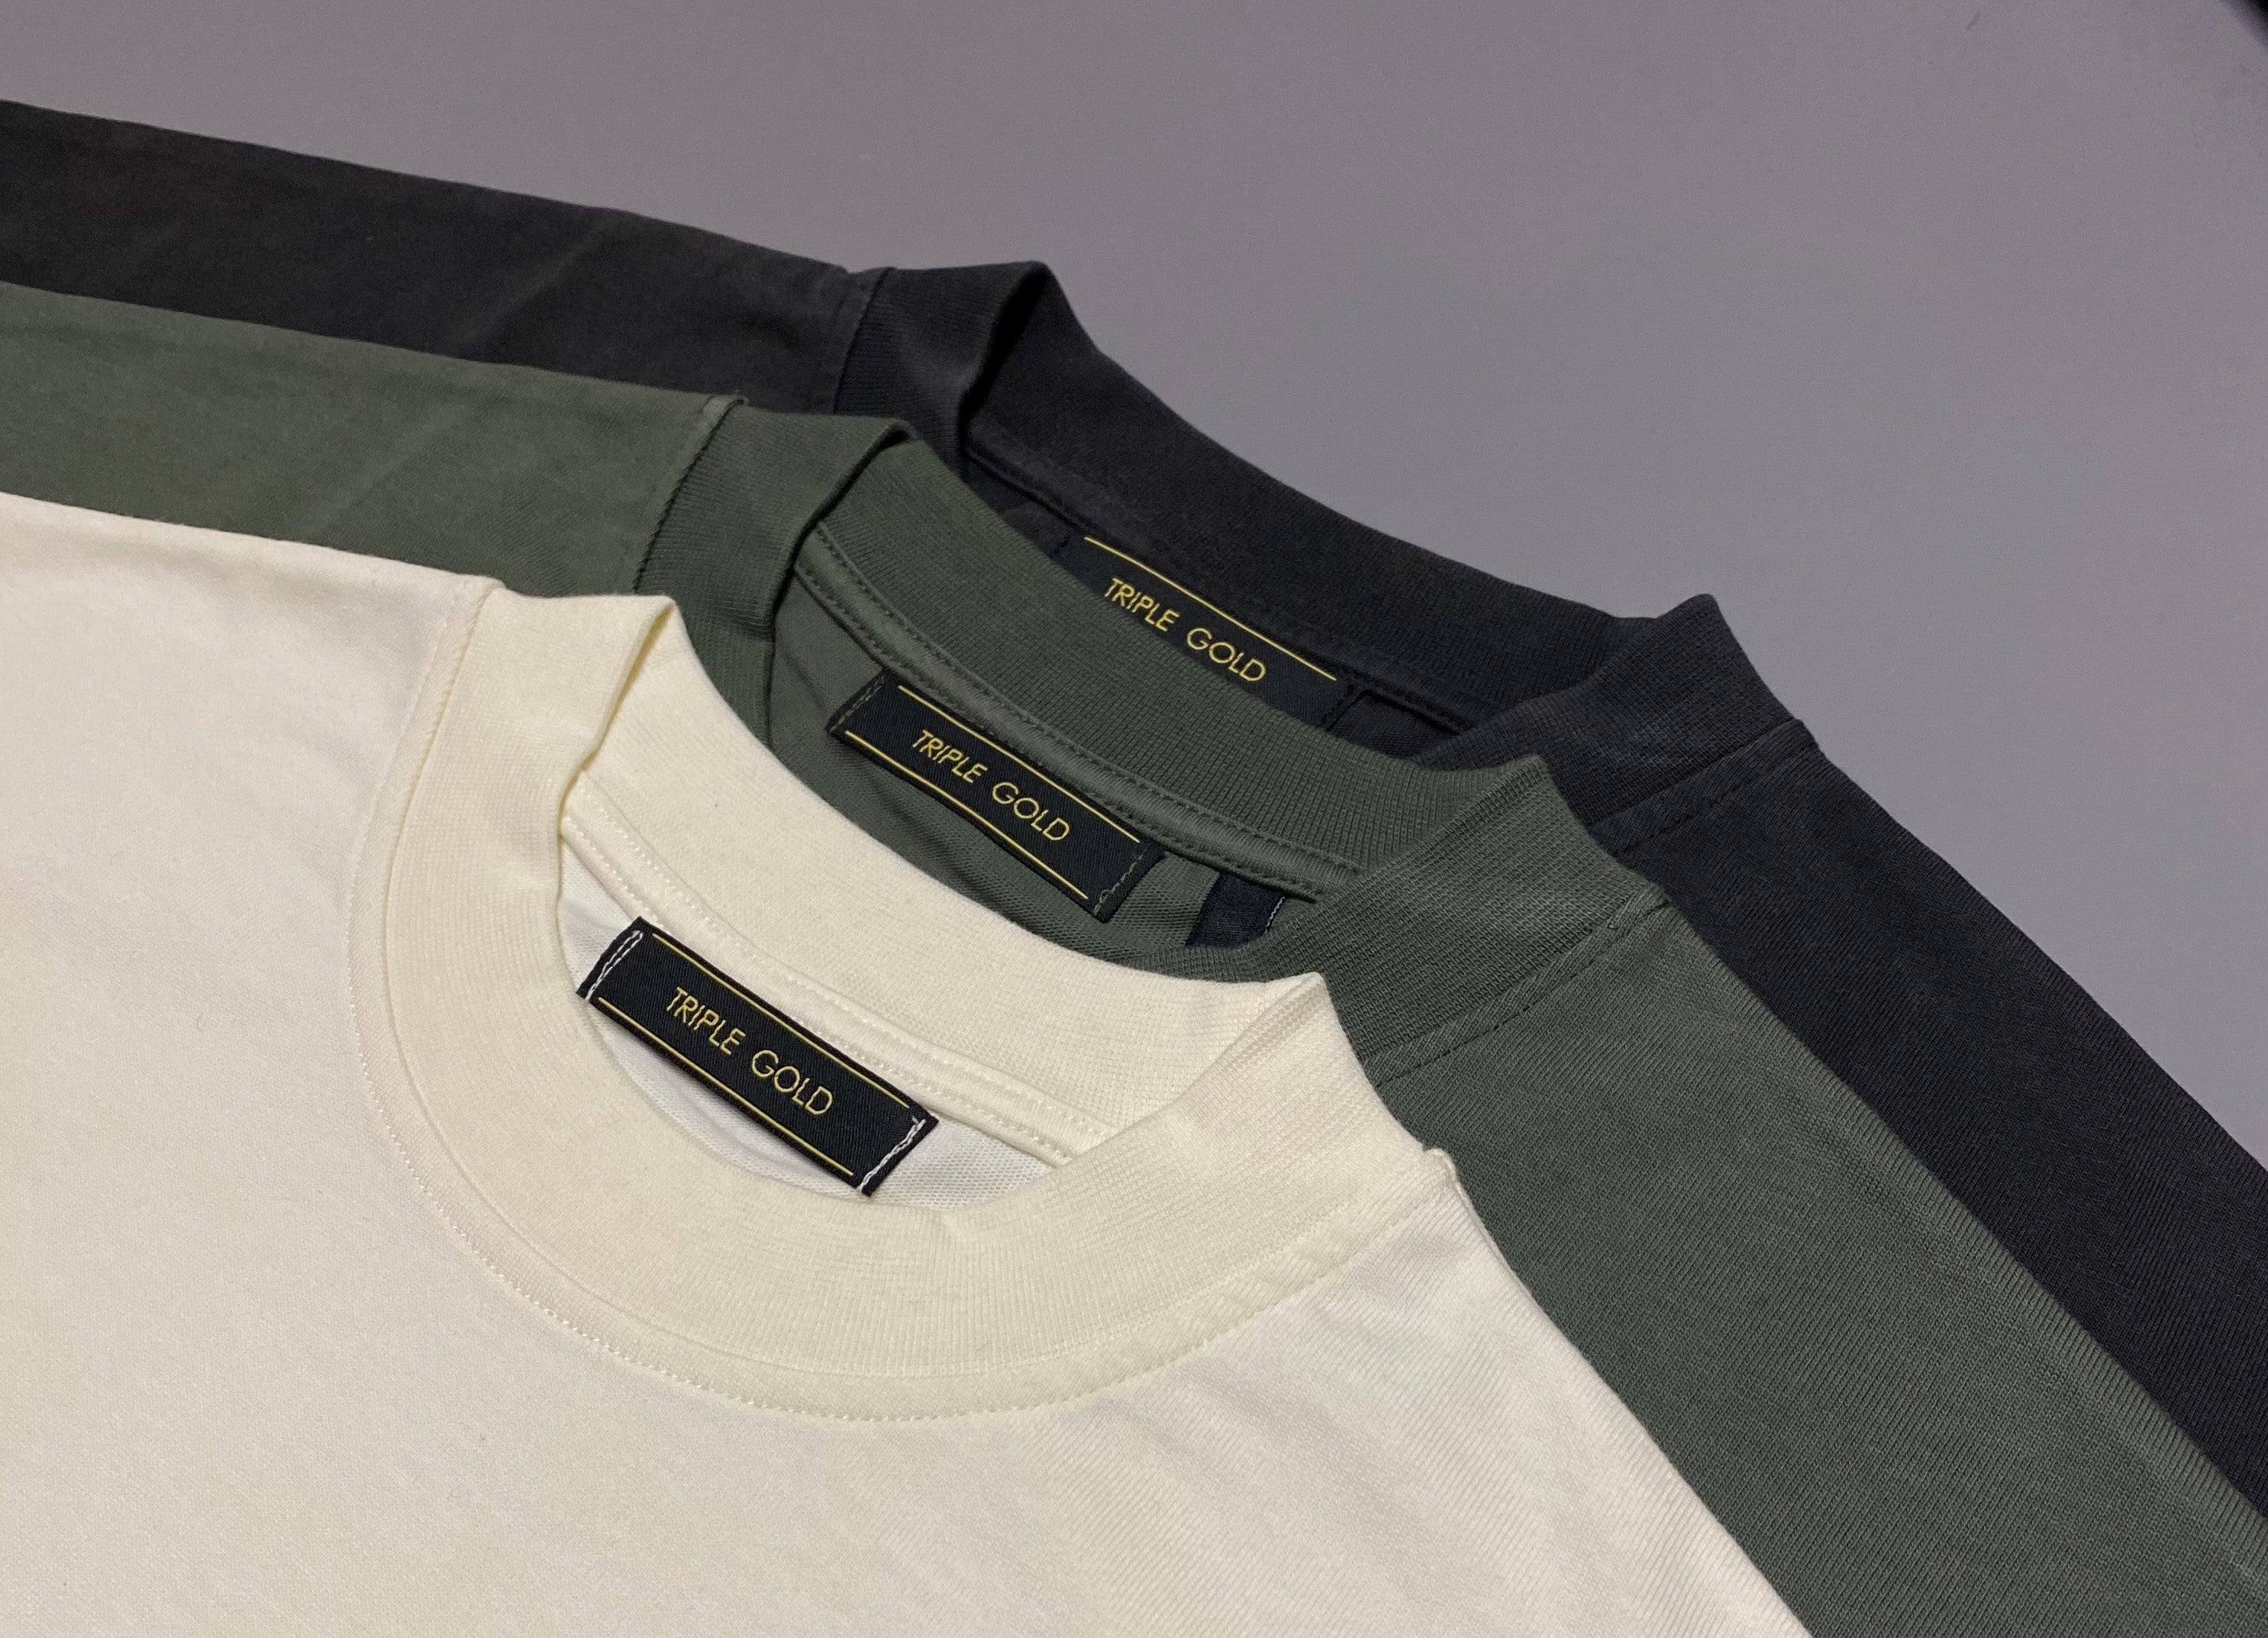 Essential t-shirts from Triple Gold clothing, a dutch clothing brand.